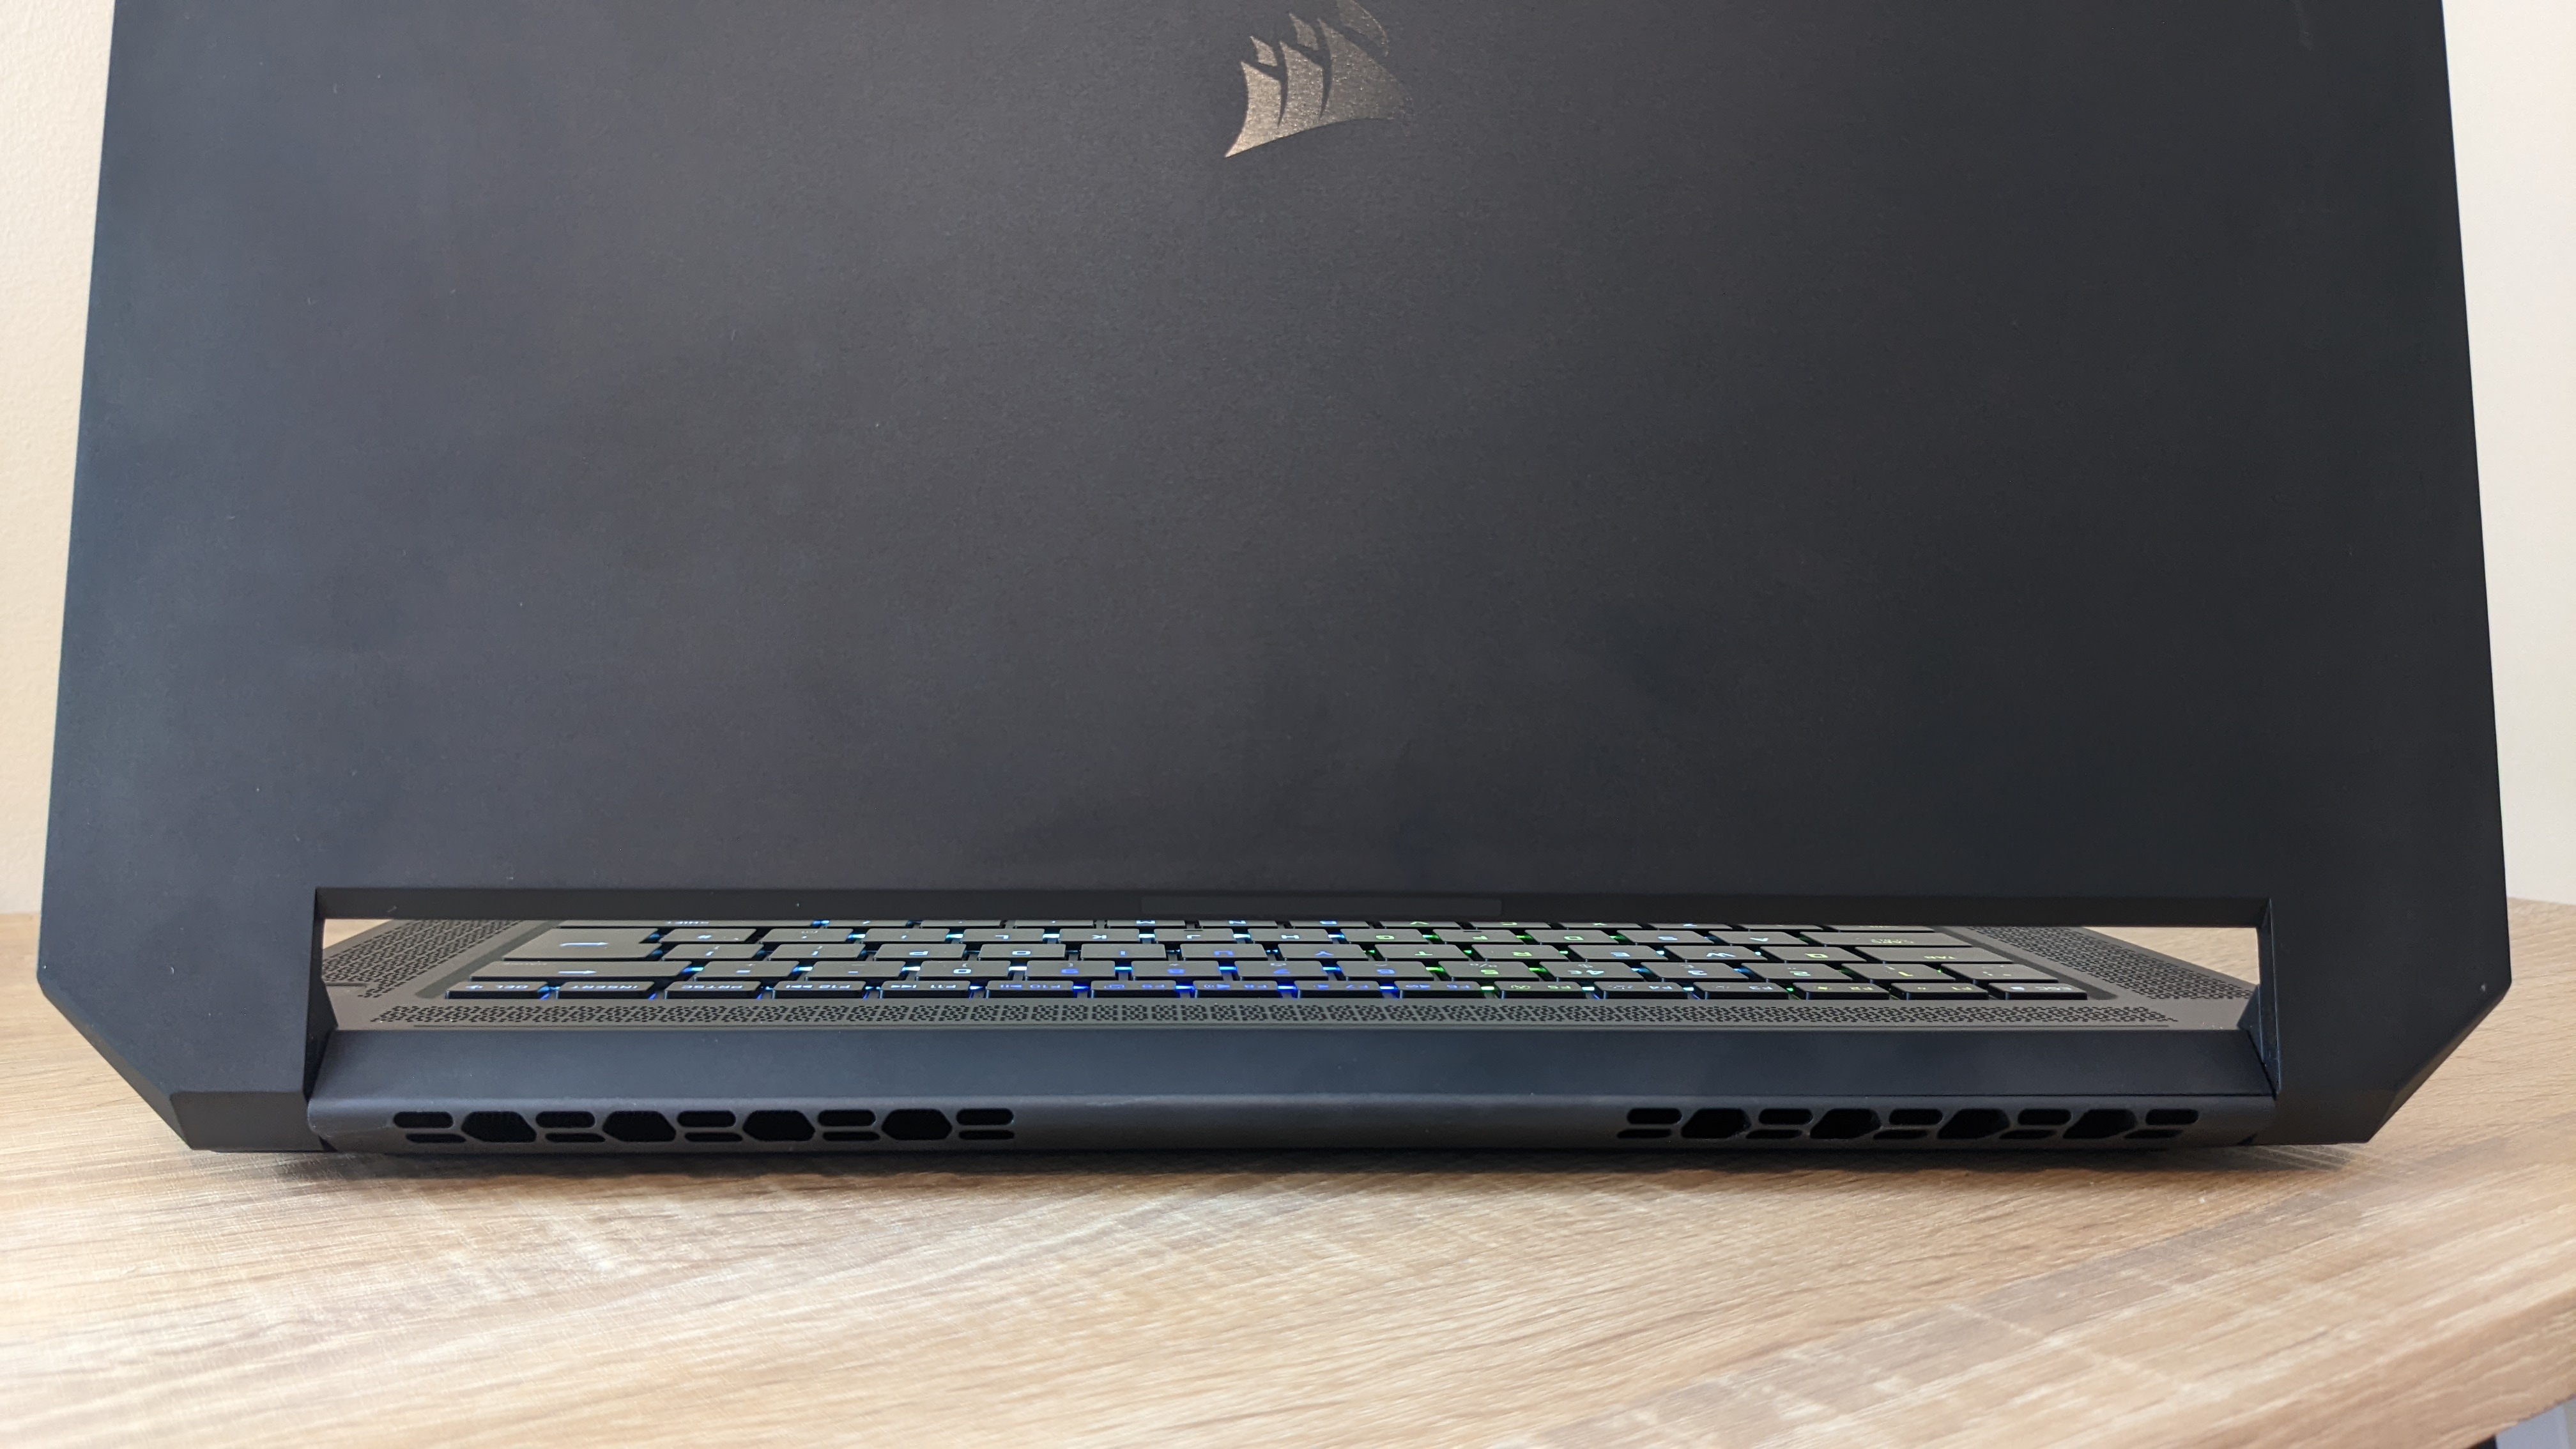 Corsair Voyager a1600 laptop on a wooden desk, shown from behind to display the cooling vents.